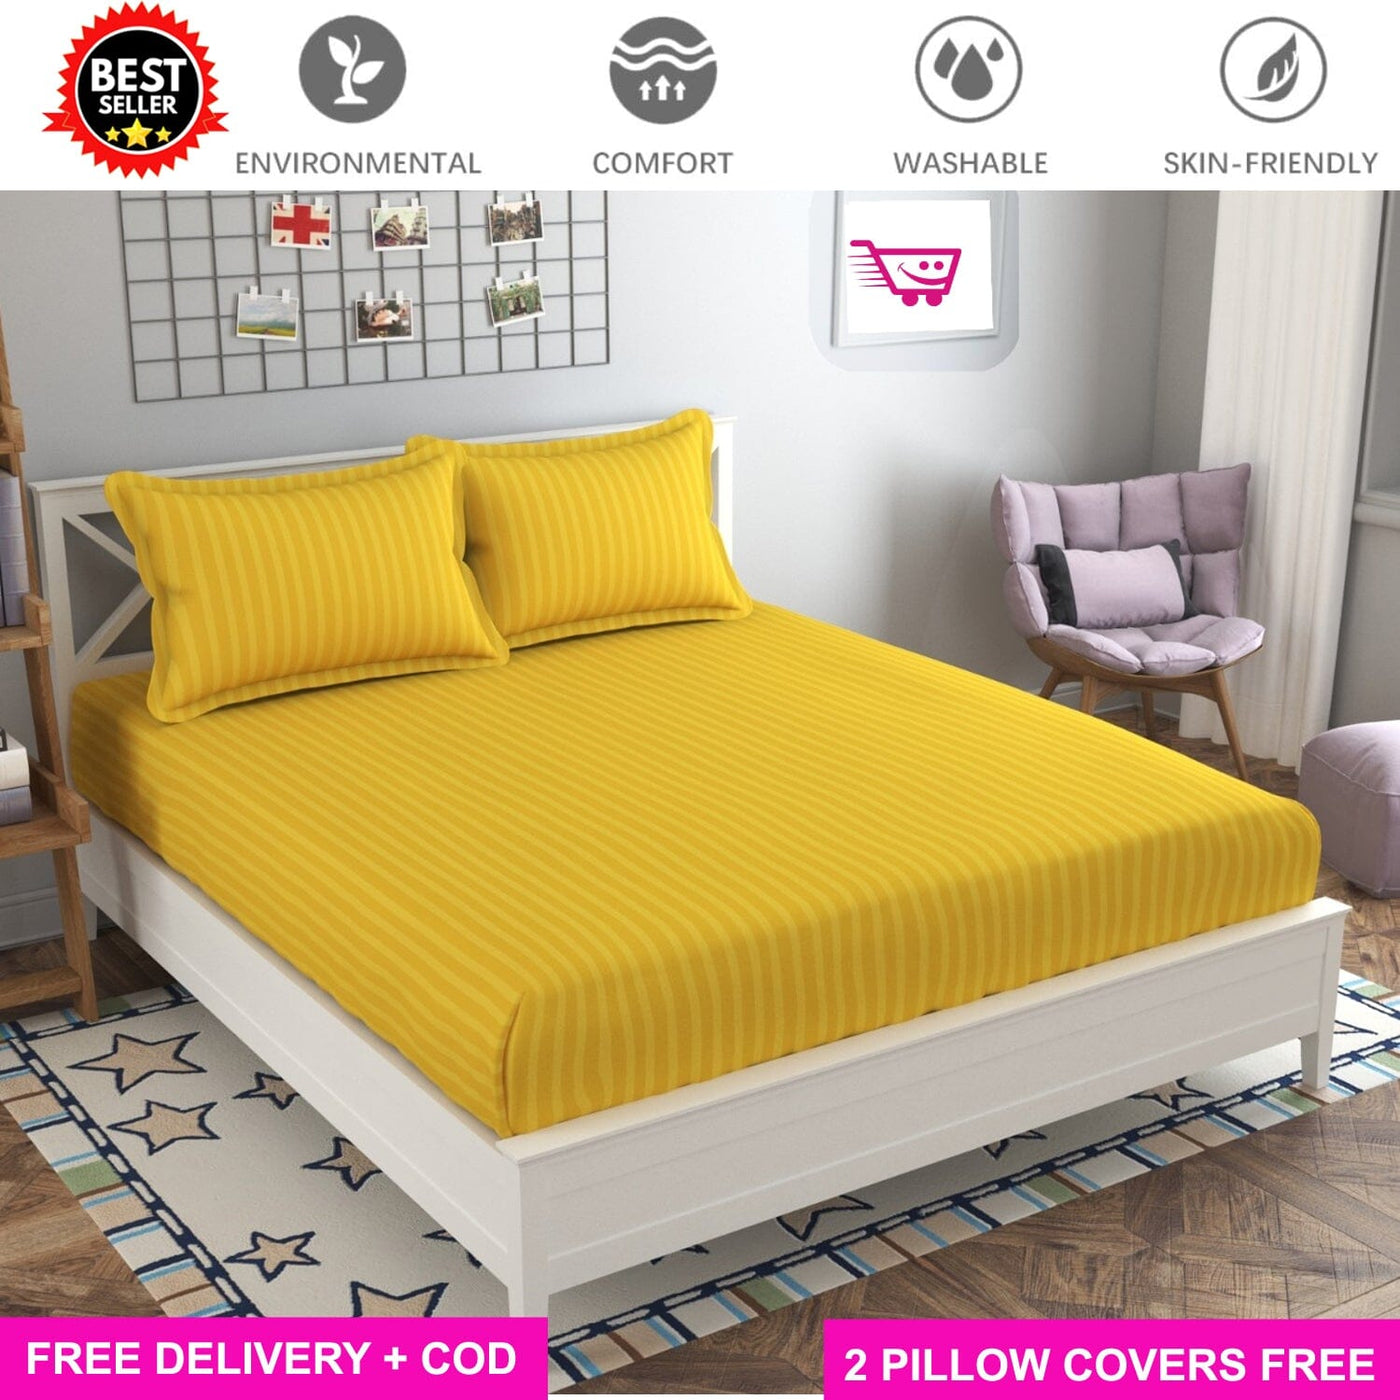 Yellow Satin Full Elastic Fitted Bedsheet with 2 Pillow Covers - King Size Bed Sheets Great Happy IN 